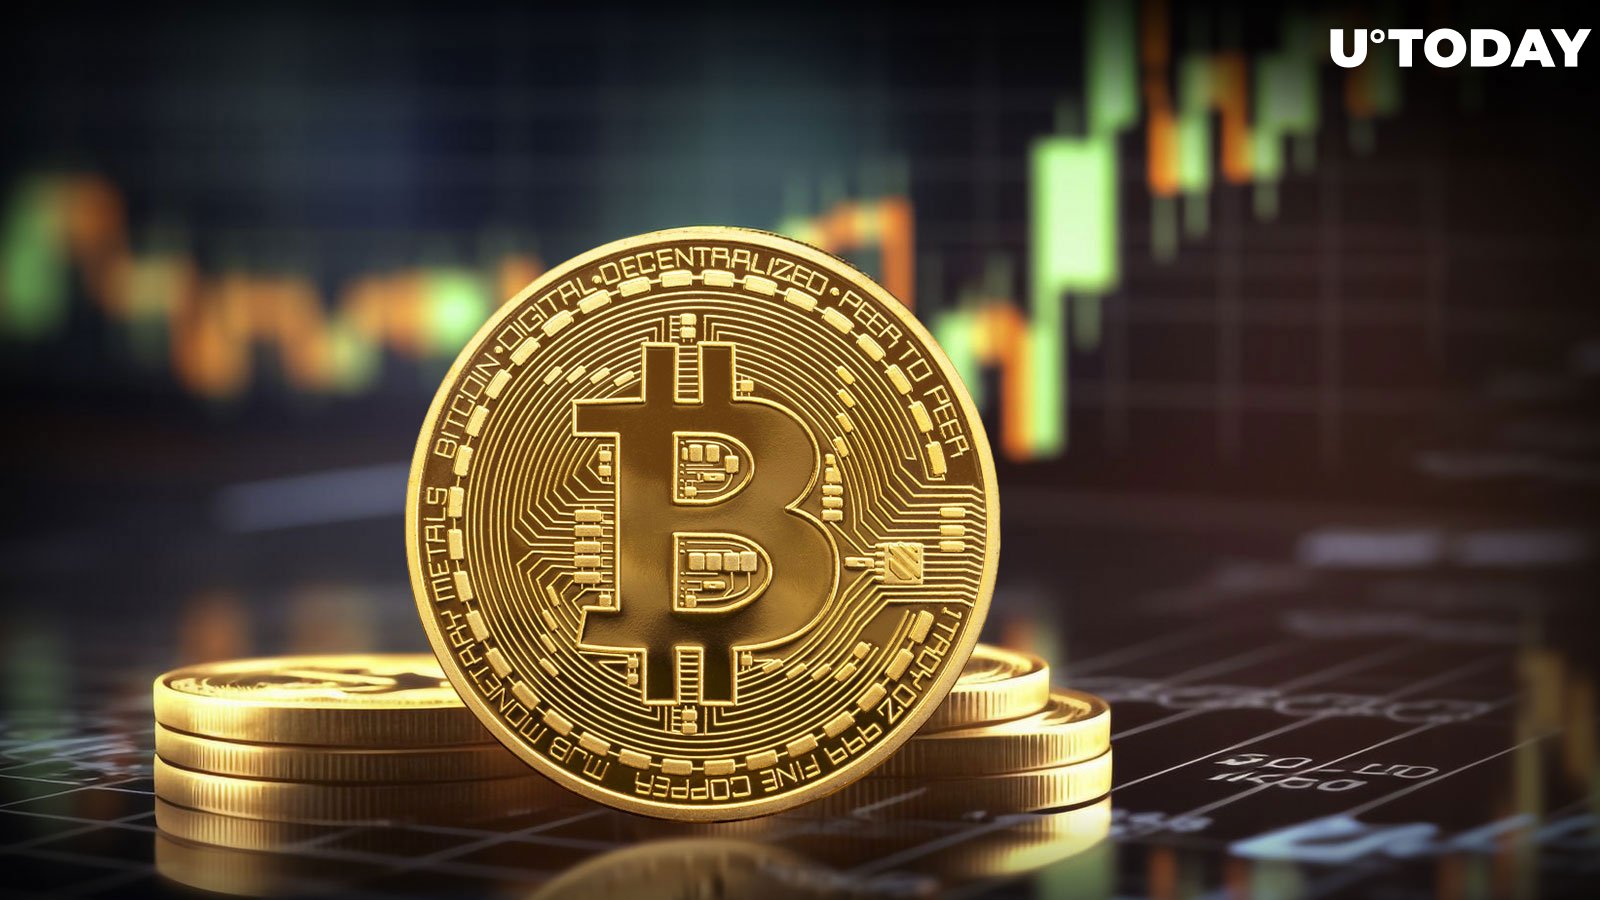 Bitcoin (BTC) Shows Signs of Breakout, Says Top Analyst